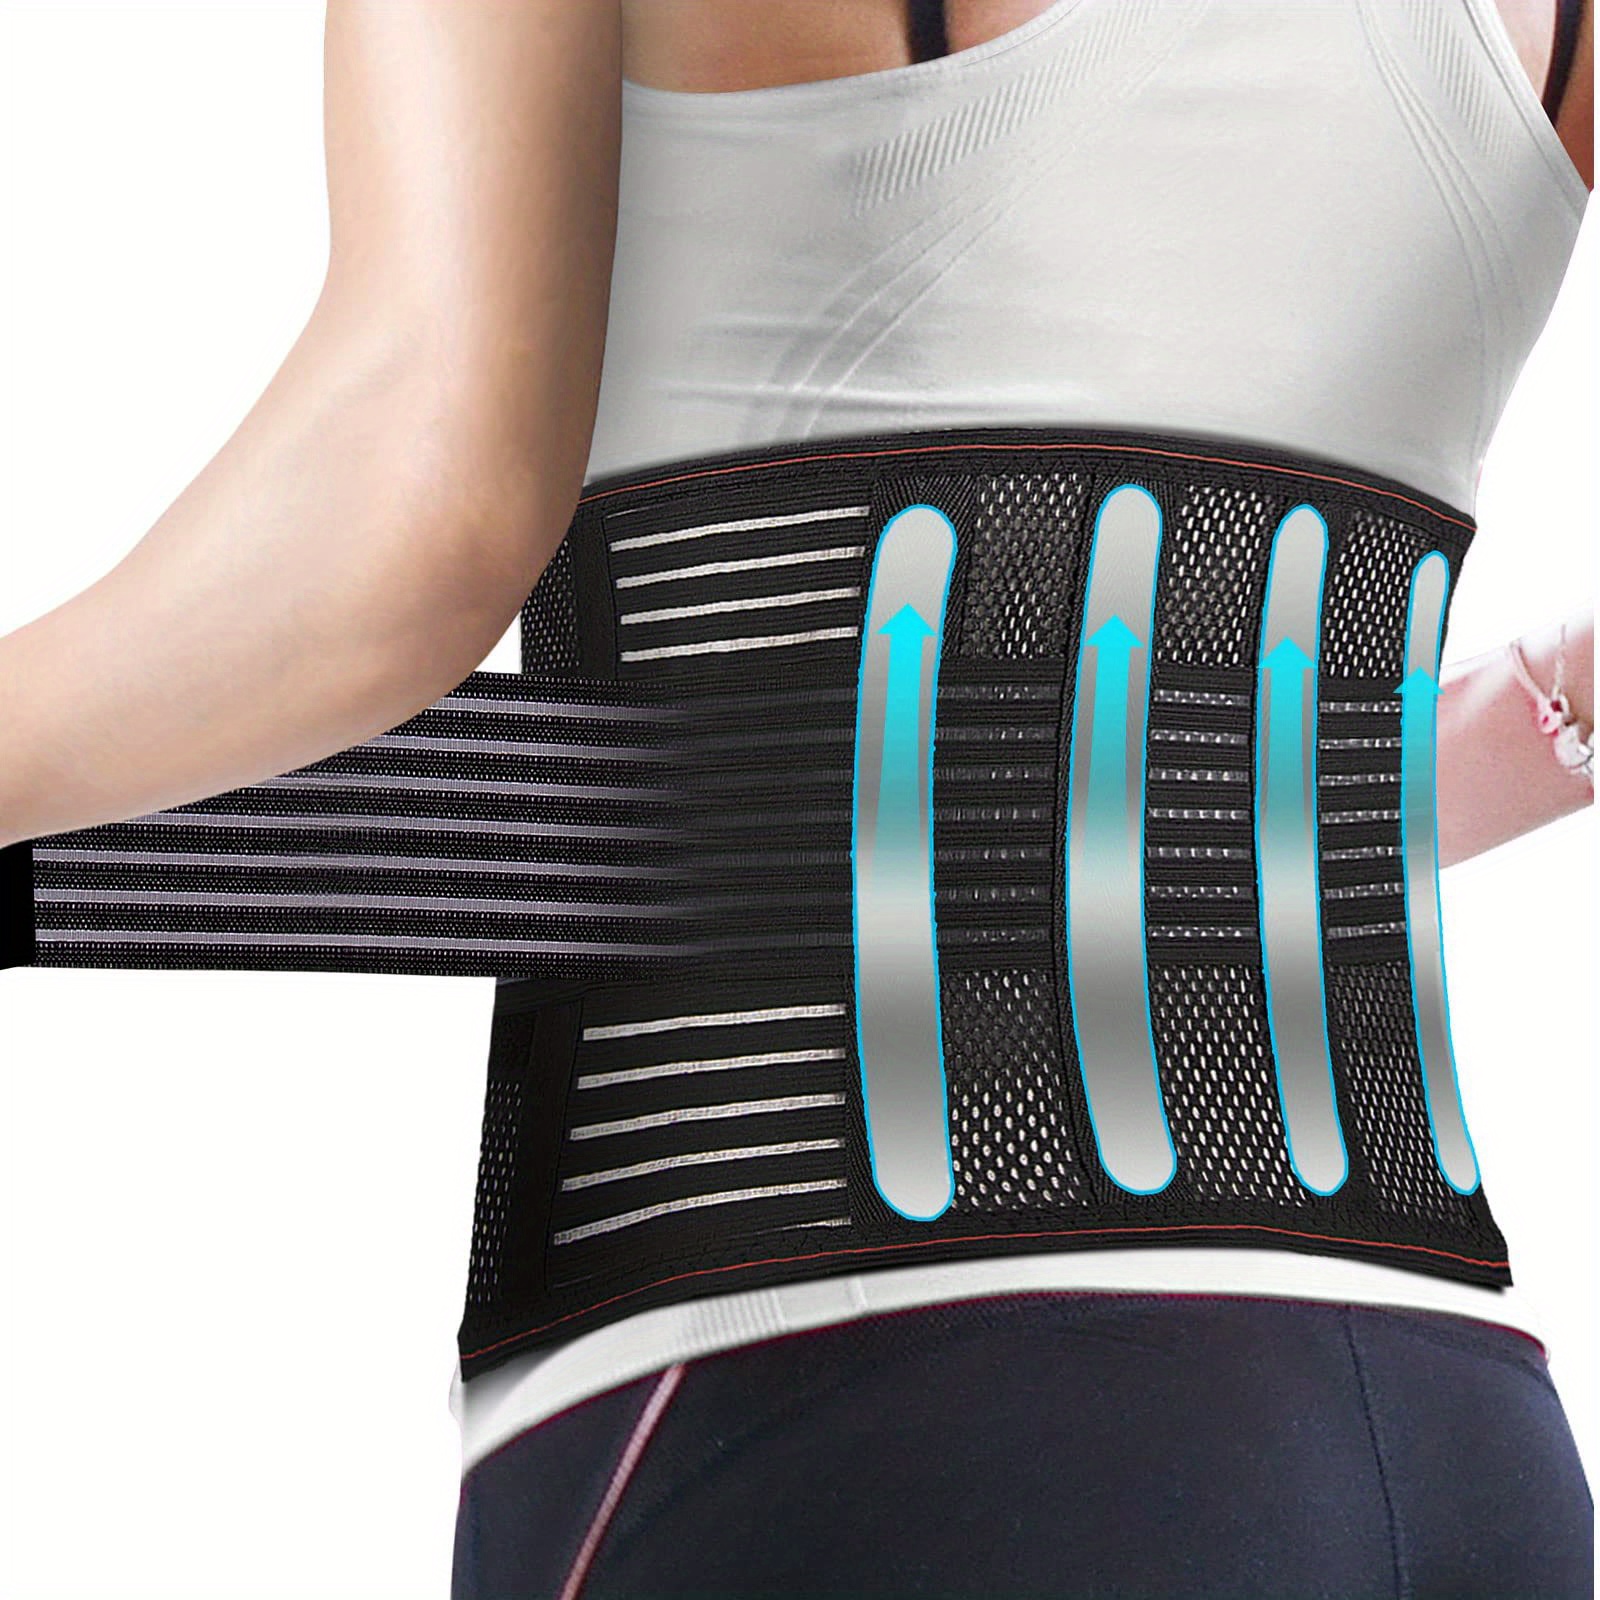 5021# Breathable Waist Trainer Belt Lumbar Support Back Brace with